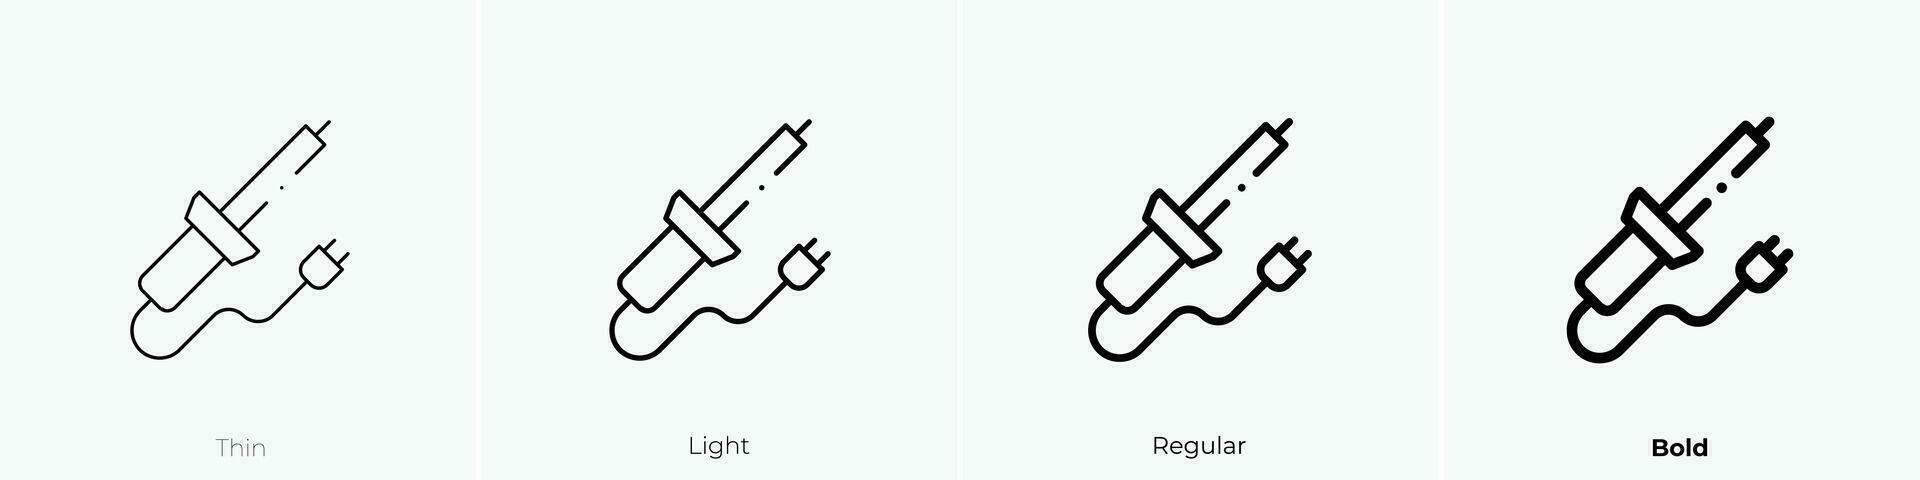 soldering iron icon. Thin, Light, Regular And Bold style design isolated on white background vector